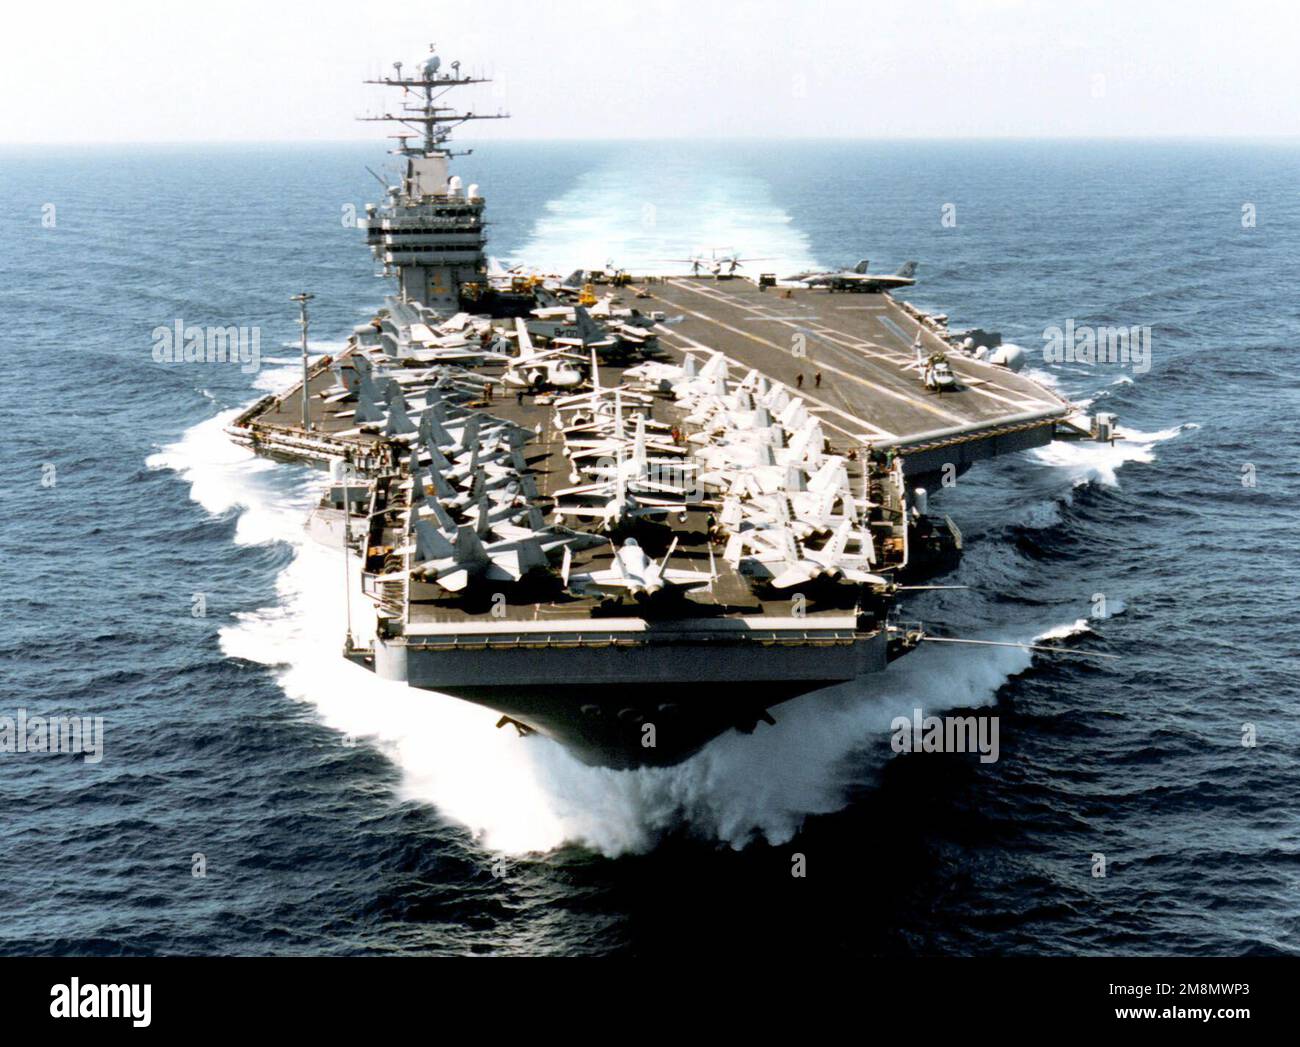 The nuclear powered aircraft carrier USS GEORGE WASHINGTON (CVN 73) underway in the Arabian Sea during their tranist to the Persian Gulf. George Washington will enforce UN sanctions against Iraq by patrolling the No-Fly Zone under Operation Southern Watch. Subject Operation/Series: SOUTHERN WATCH Country: Unknown Stock Photo